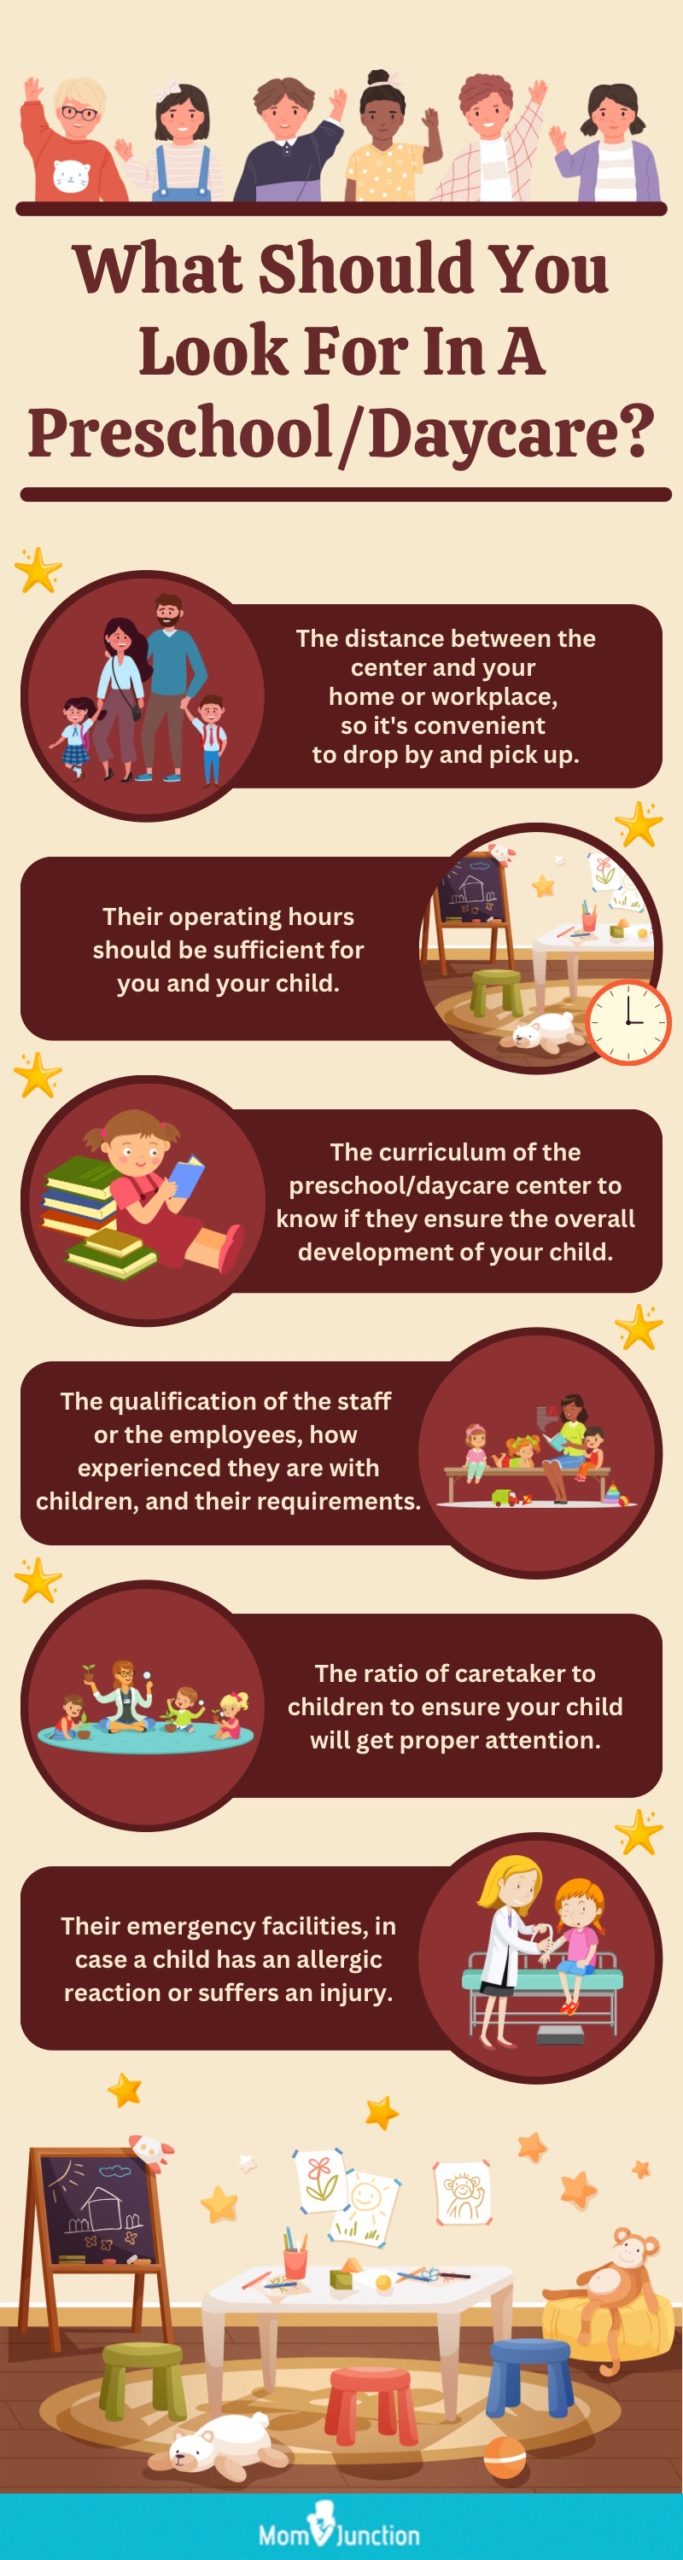 factors to consider when choosing a preschool/daycare (infographic)